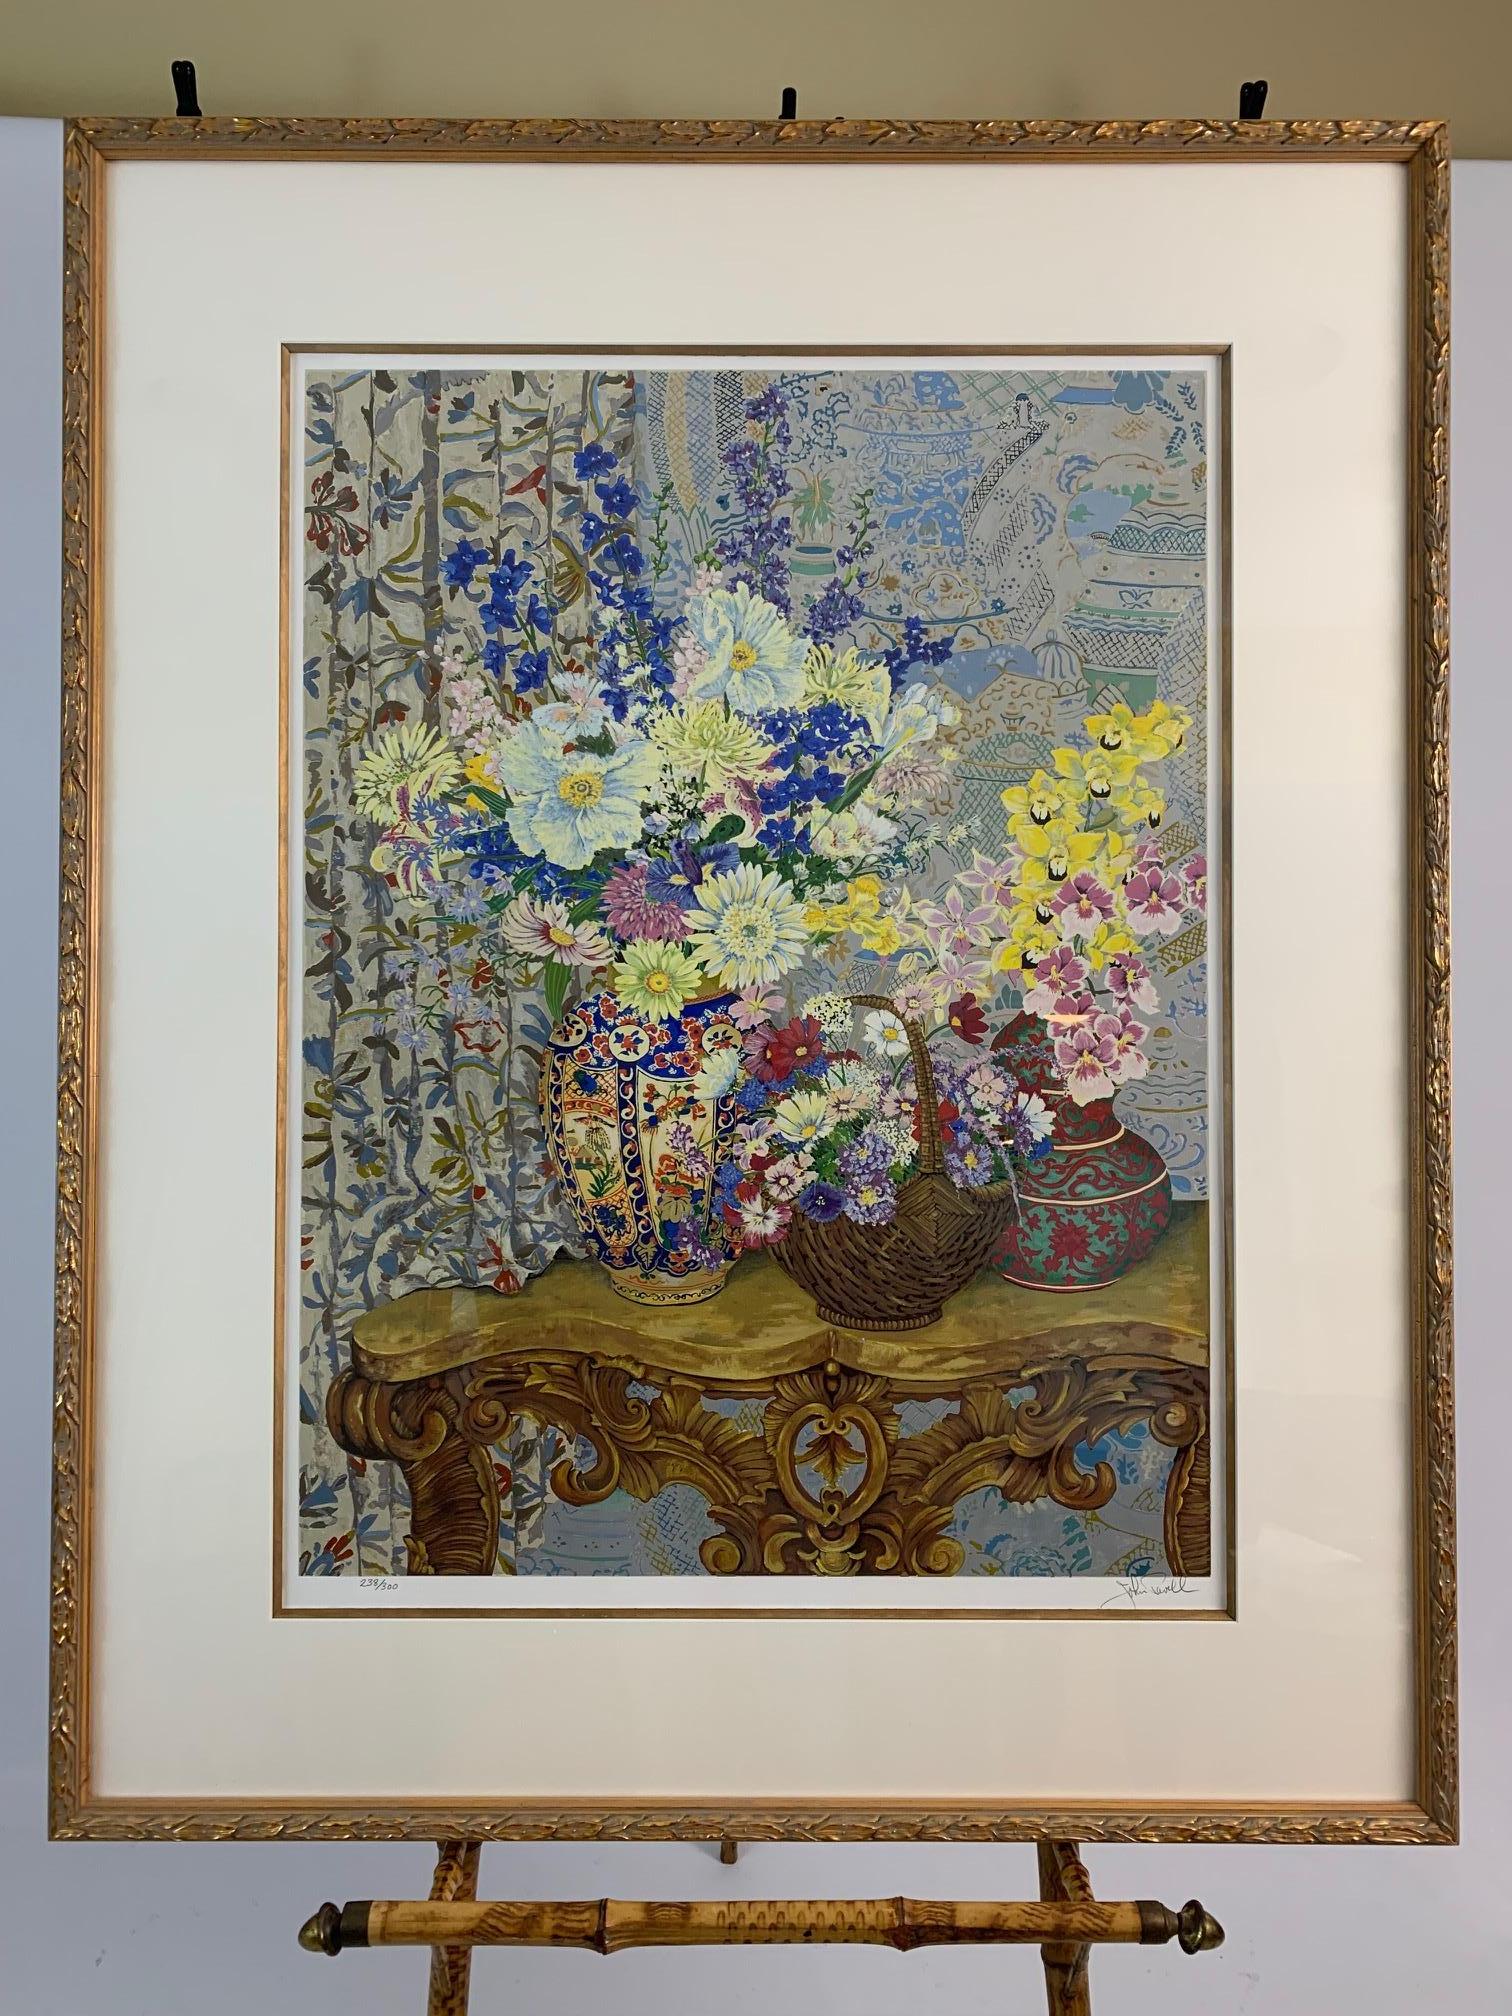 Magnificent classic John Powell still life of flower arrangements in meticulously detailed vases on a pretty French console. Serigraph on paper, Limited Edition 238/300, signed lower right
Matted and pretty gold frame

Paper 24”W x 32” H x 1”